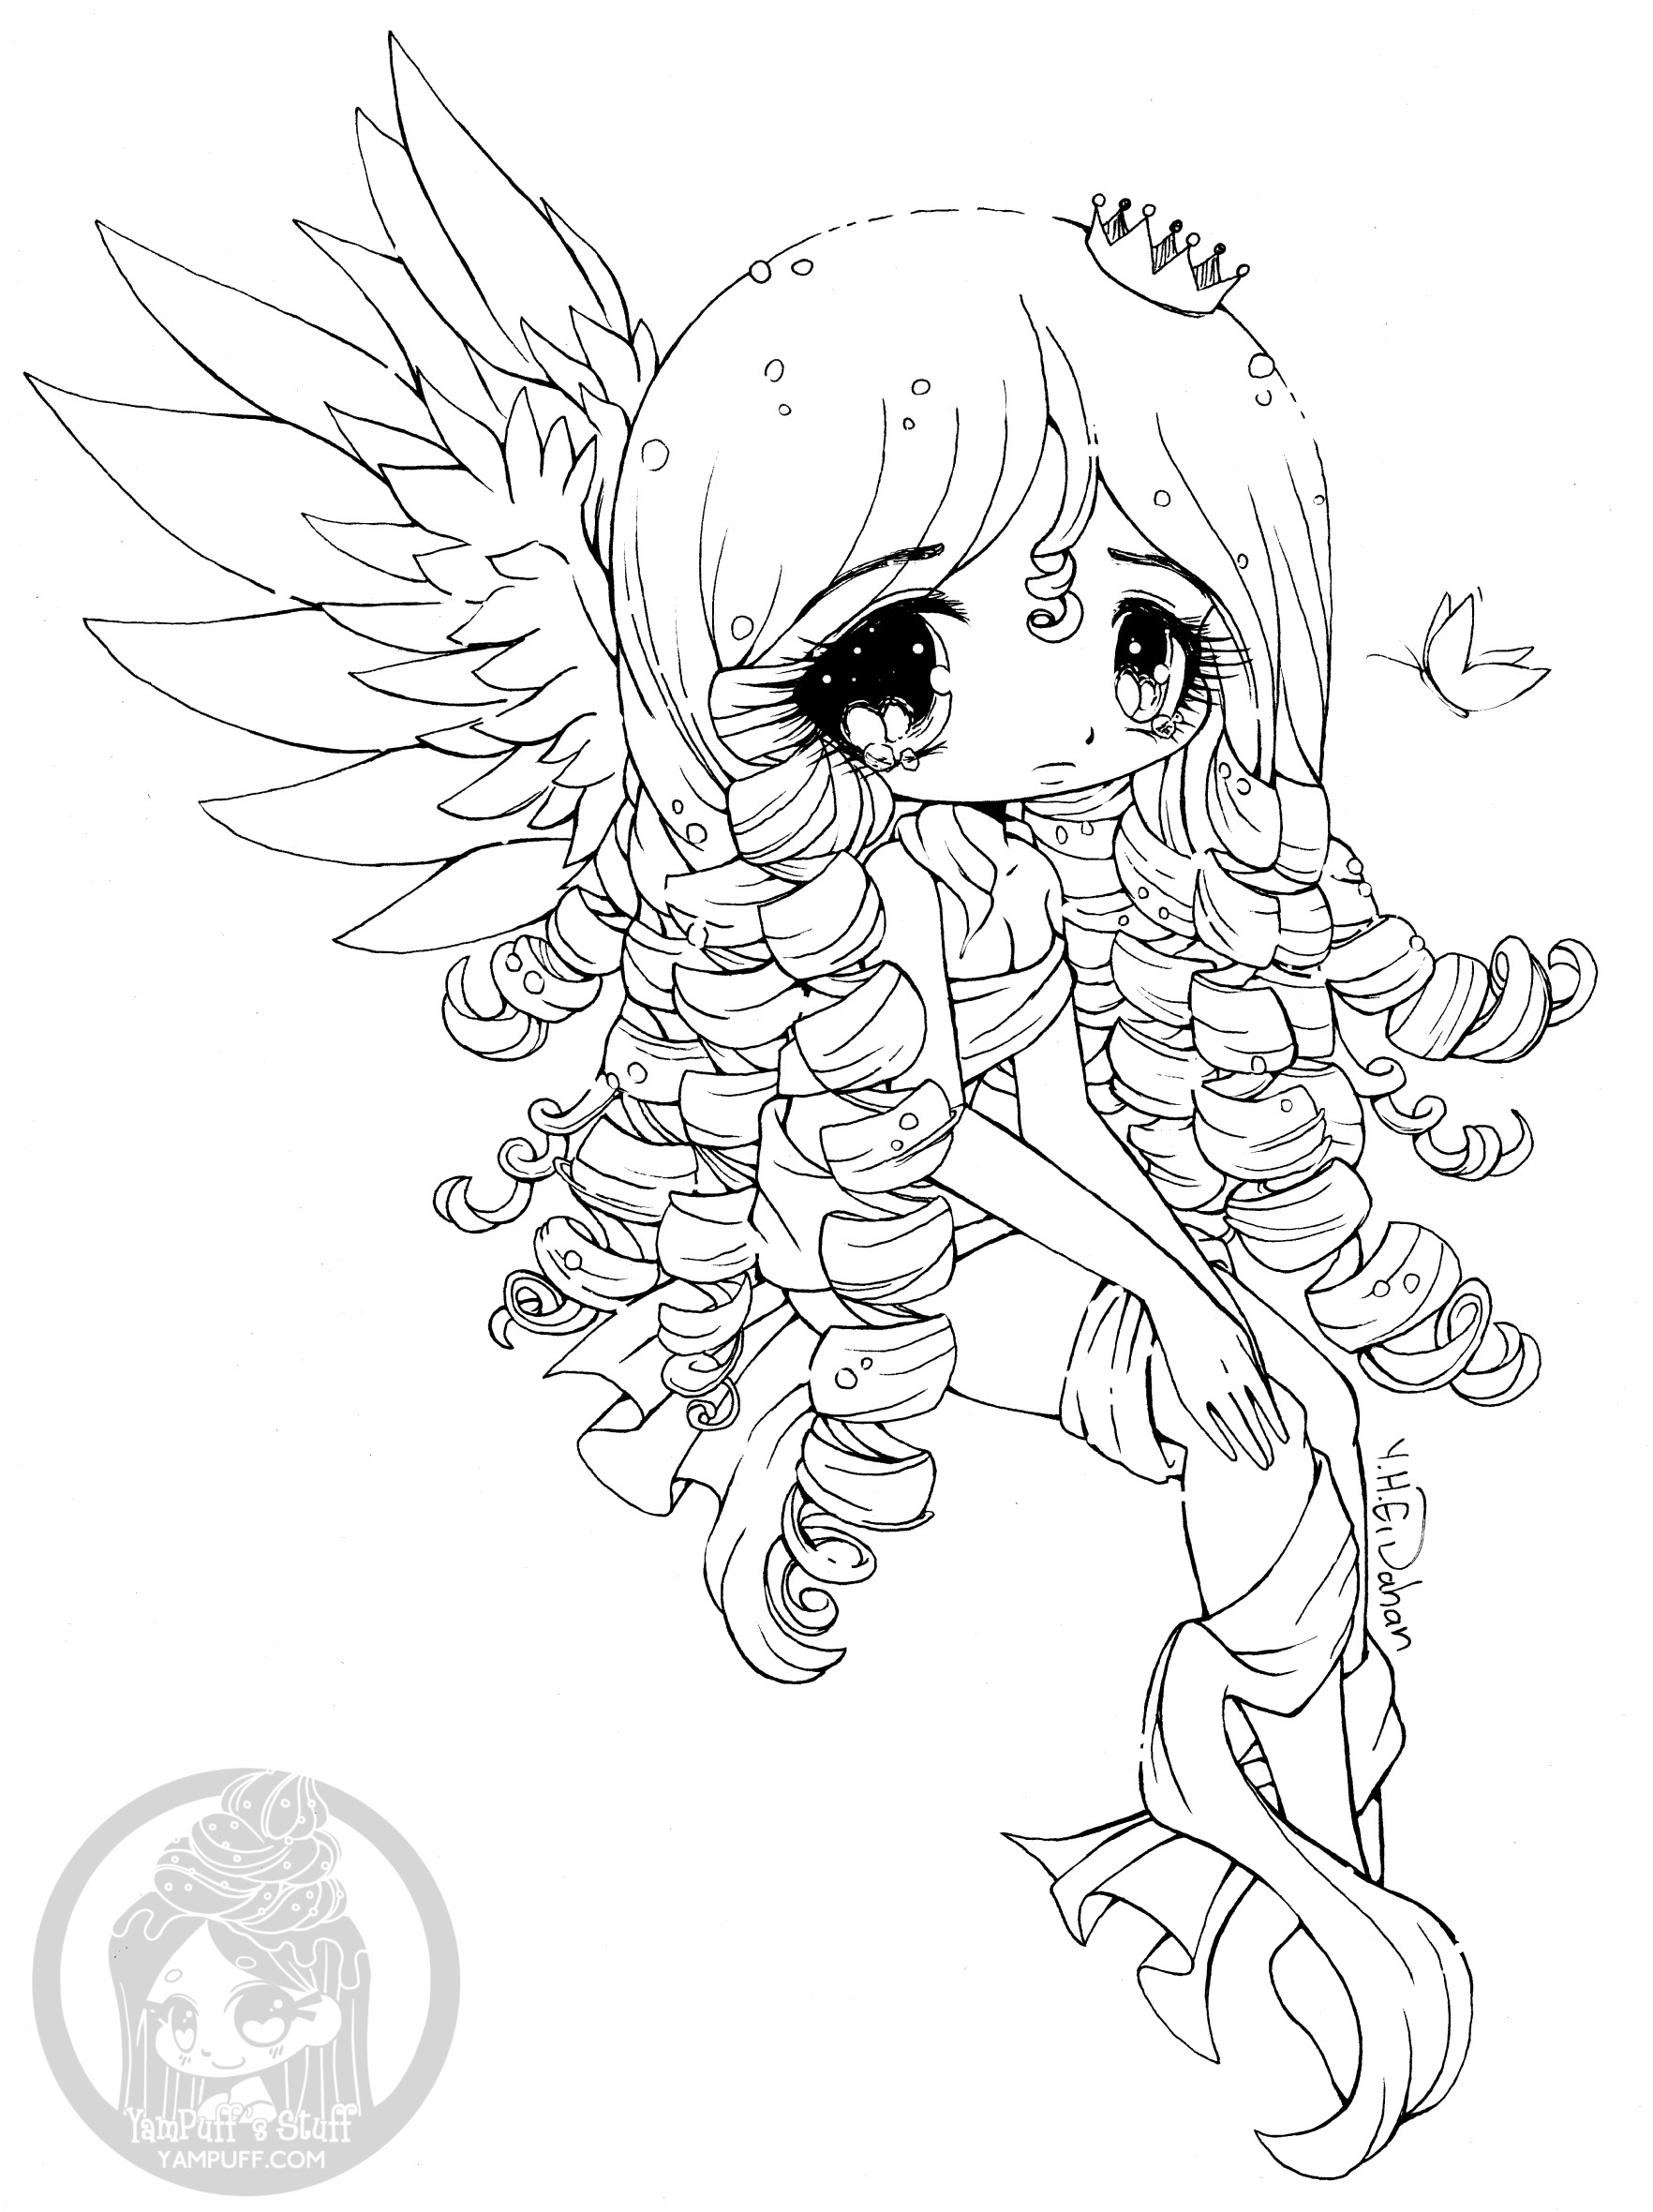 Chibi Girls Playing With Animals Coloring Pages - Coloring Pages